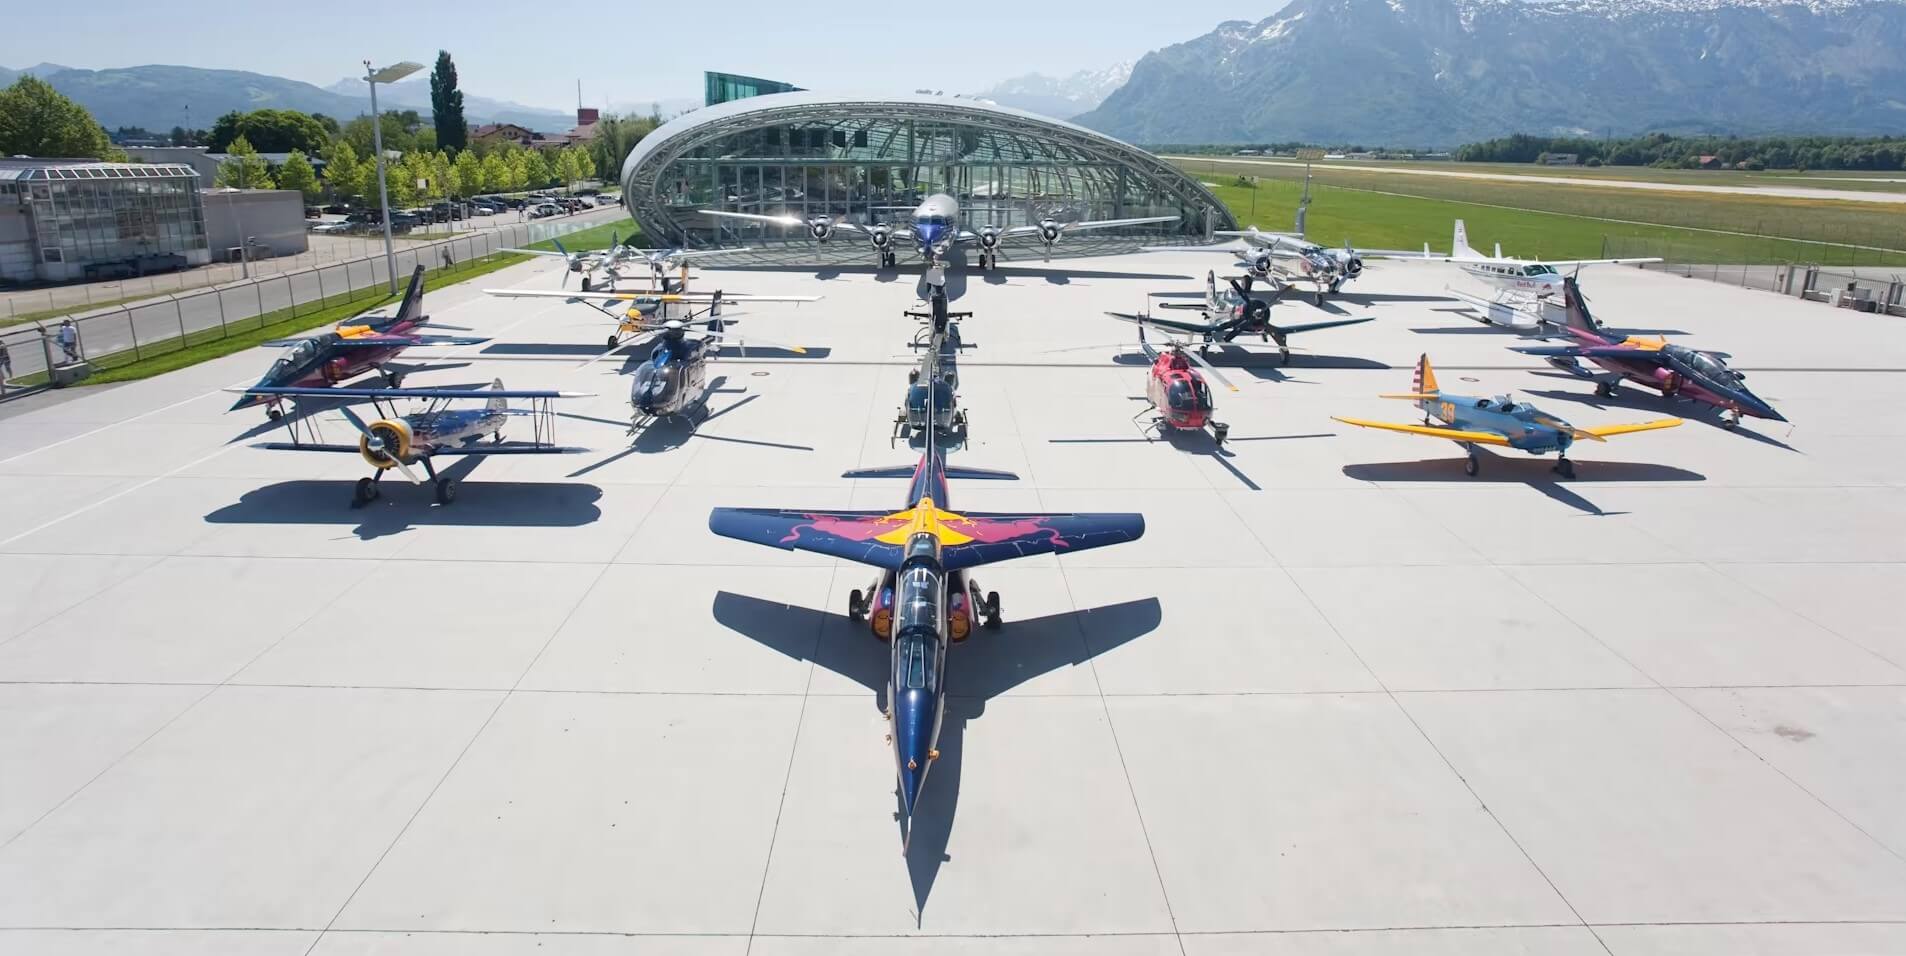 Multiple aircraft with Red Bull liveries parked on a ramp at an airport in Austria.